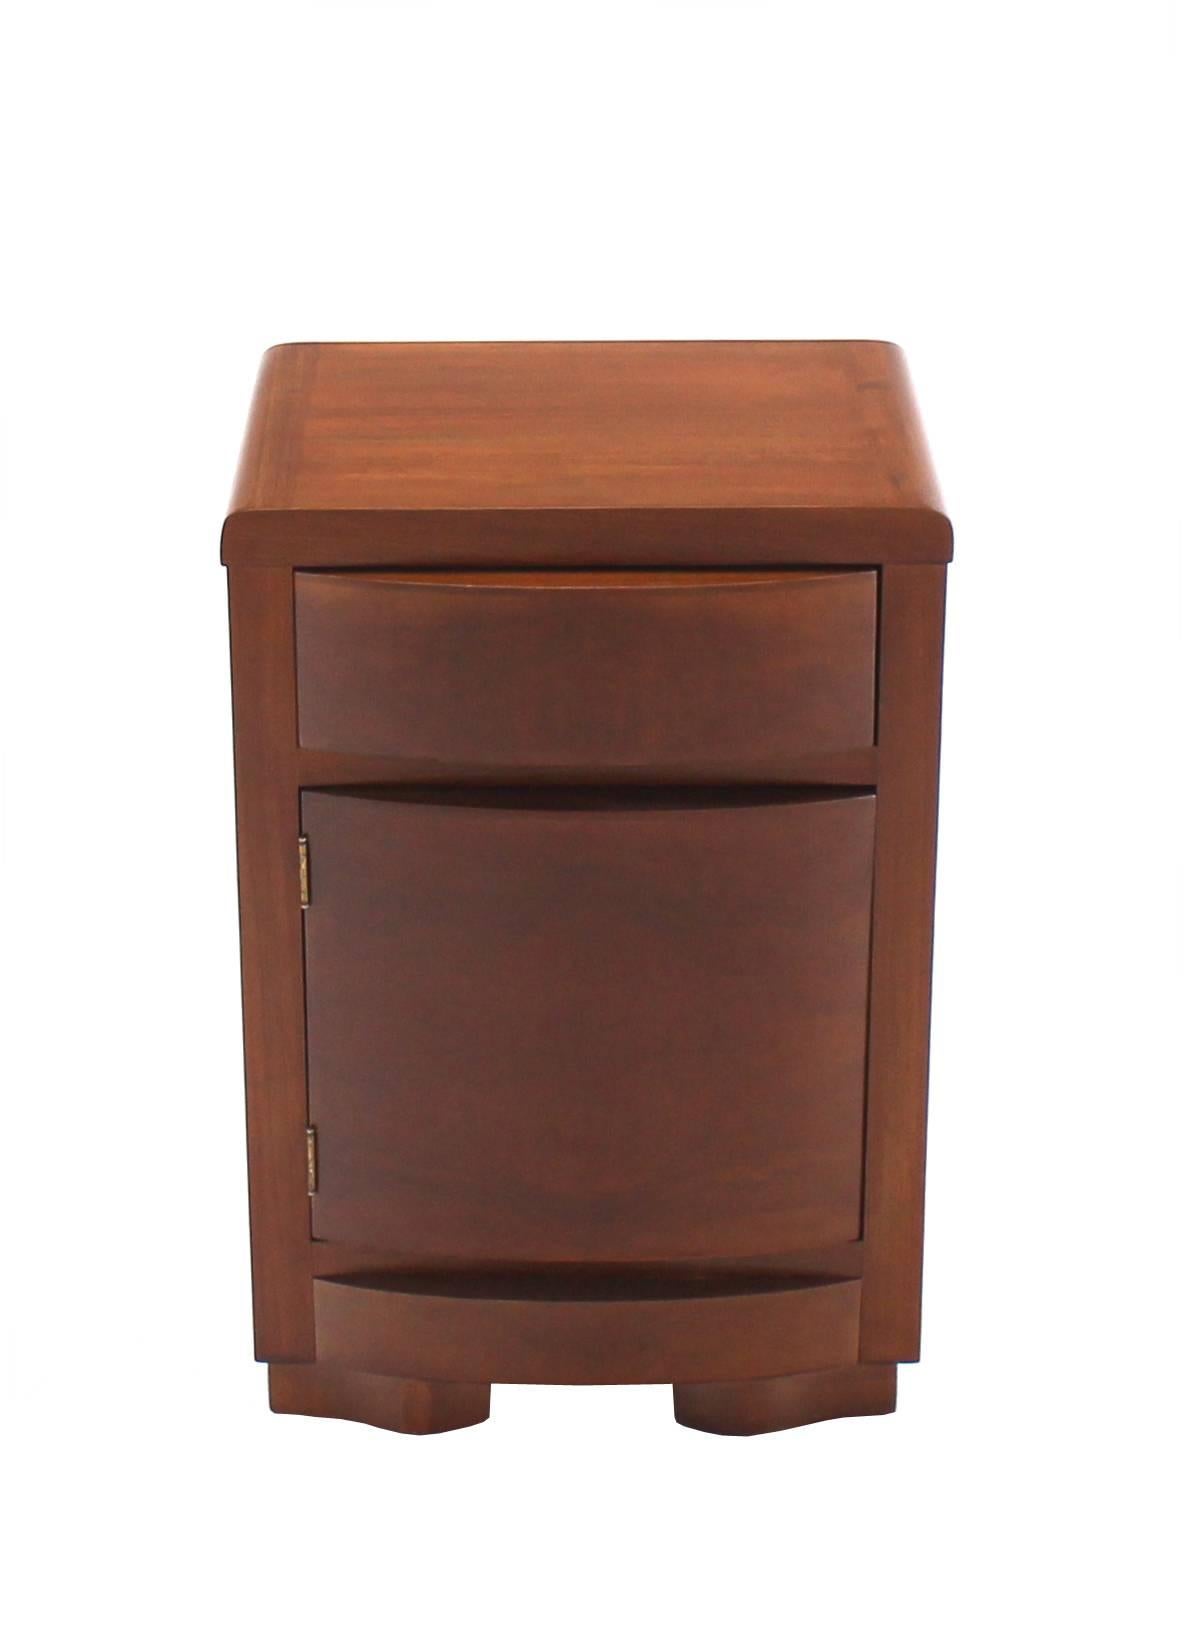 Pair of Art Deco Walnut End Tables Nightstands 3